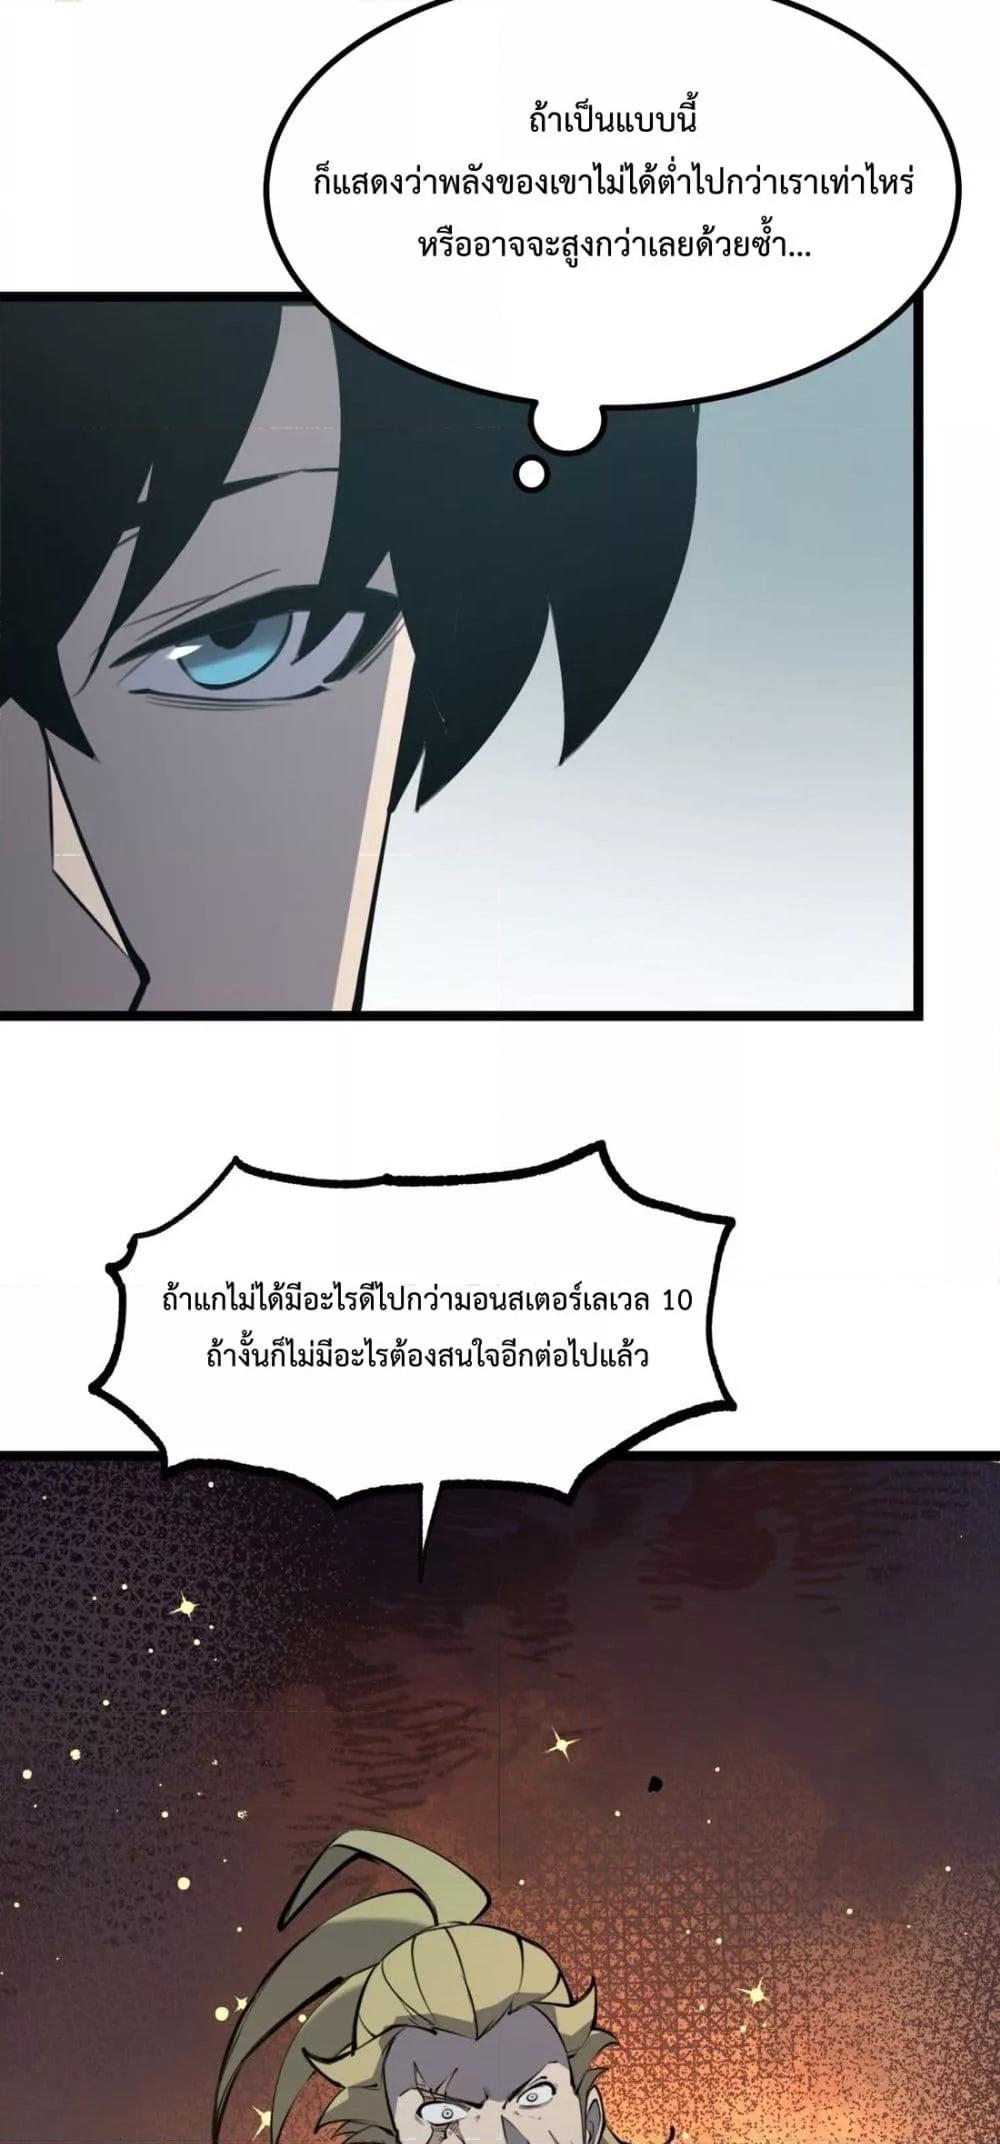 I Became The King by Scavenging โ€“ เนเธเนเธฅเน เน€เธฅเน€เธงเนเธฅเธฅเธฃเธดเนเธ เธ•เธญเธเธ—เธตเน 16 (19)